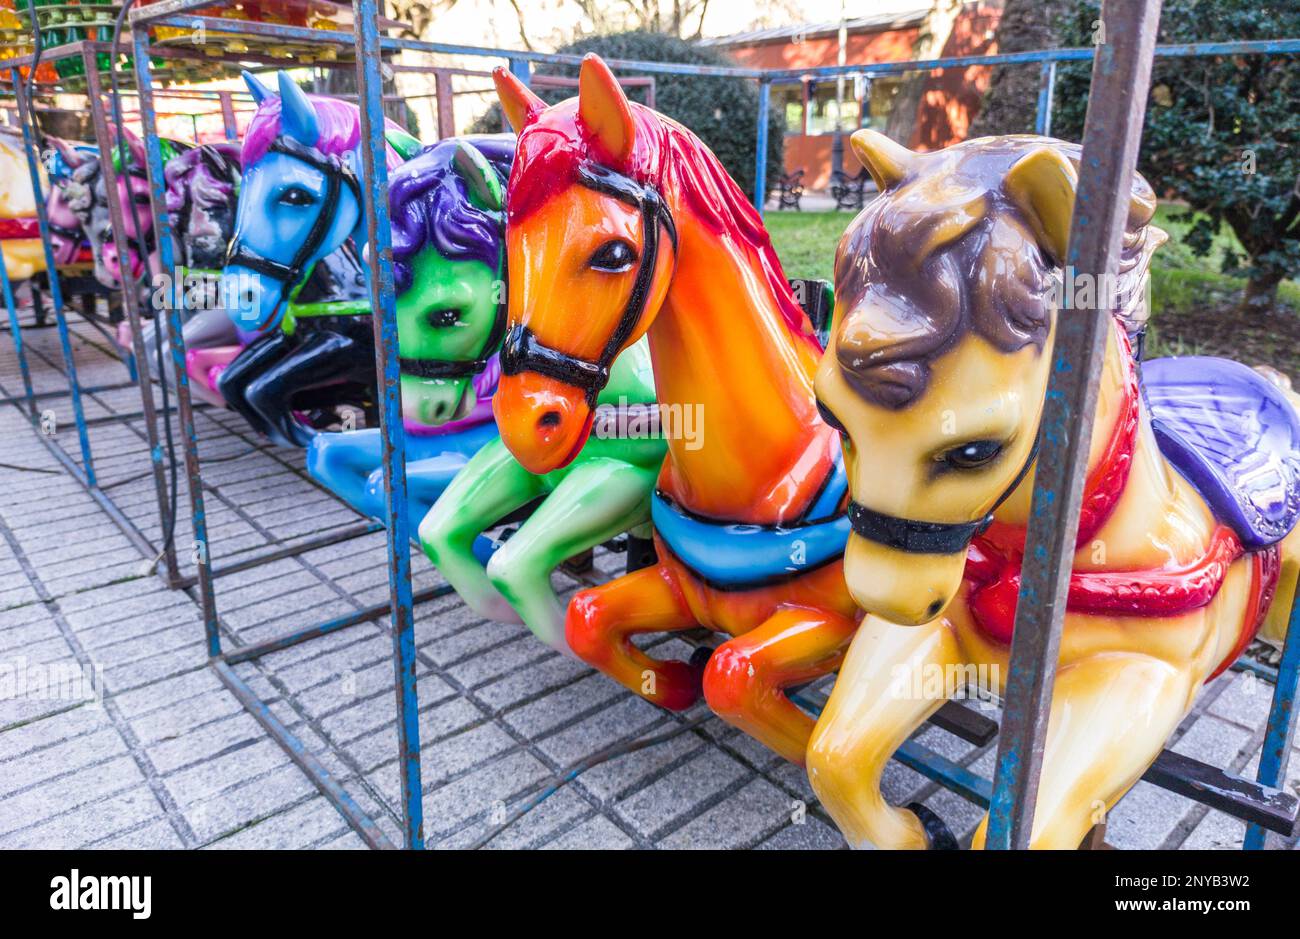 Horses out of merry-go-round placed on line. Outdoors shoot. Stock Photo